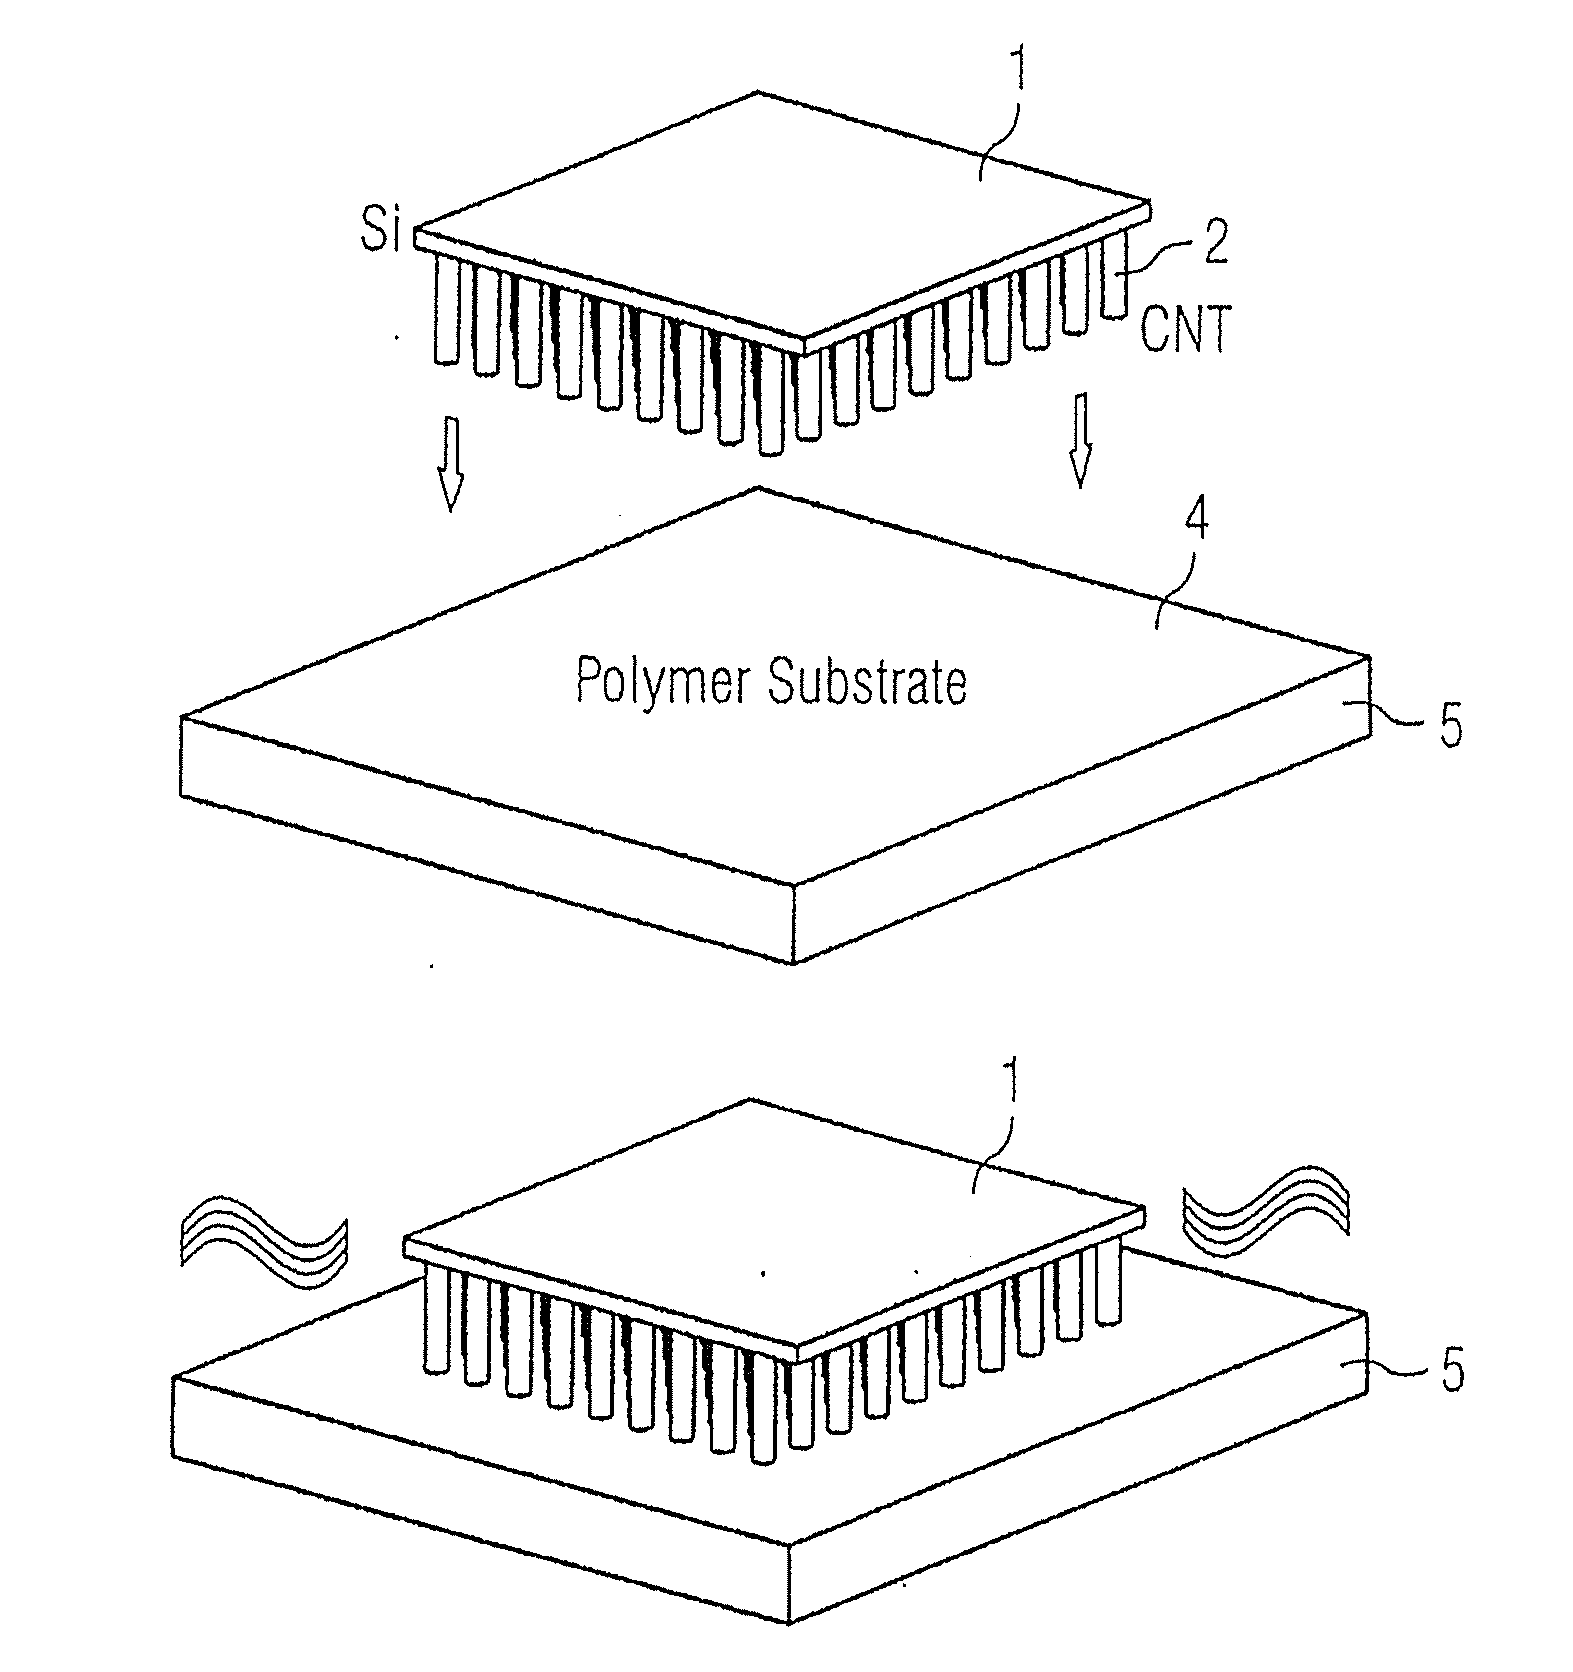 Substrate with carbon nanotubes, and method to transfer carbon nanotubes